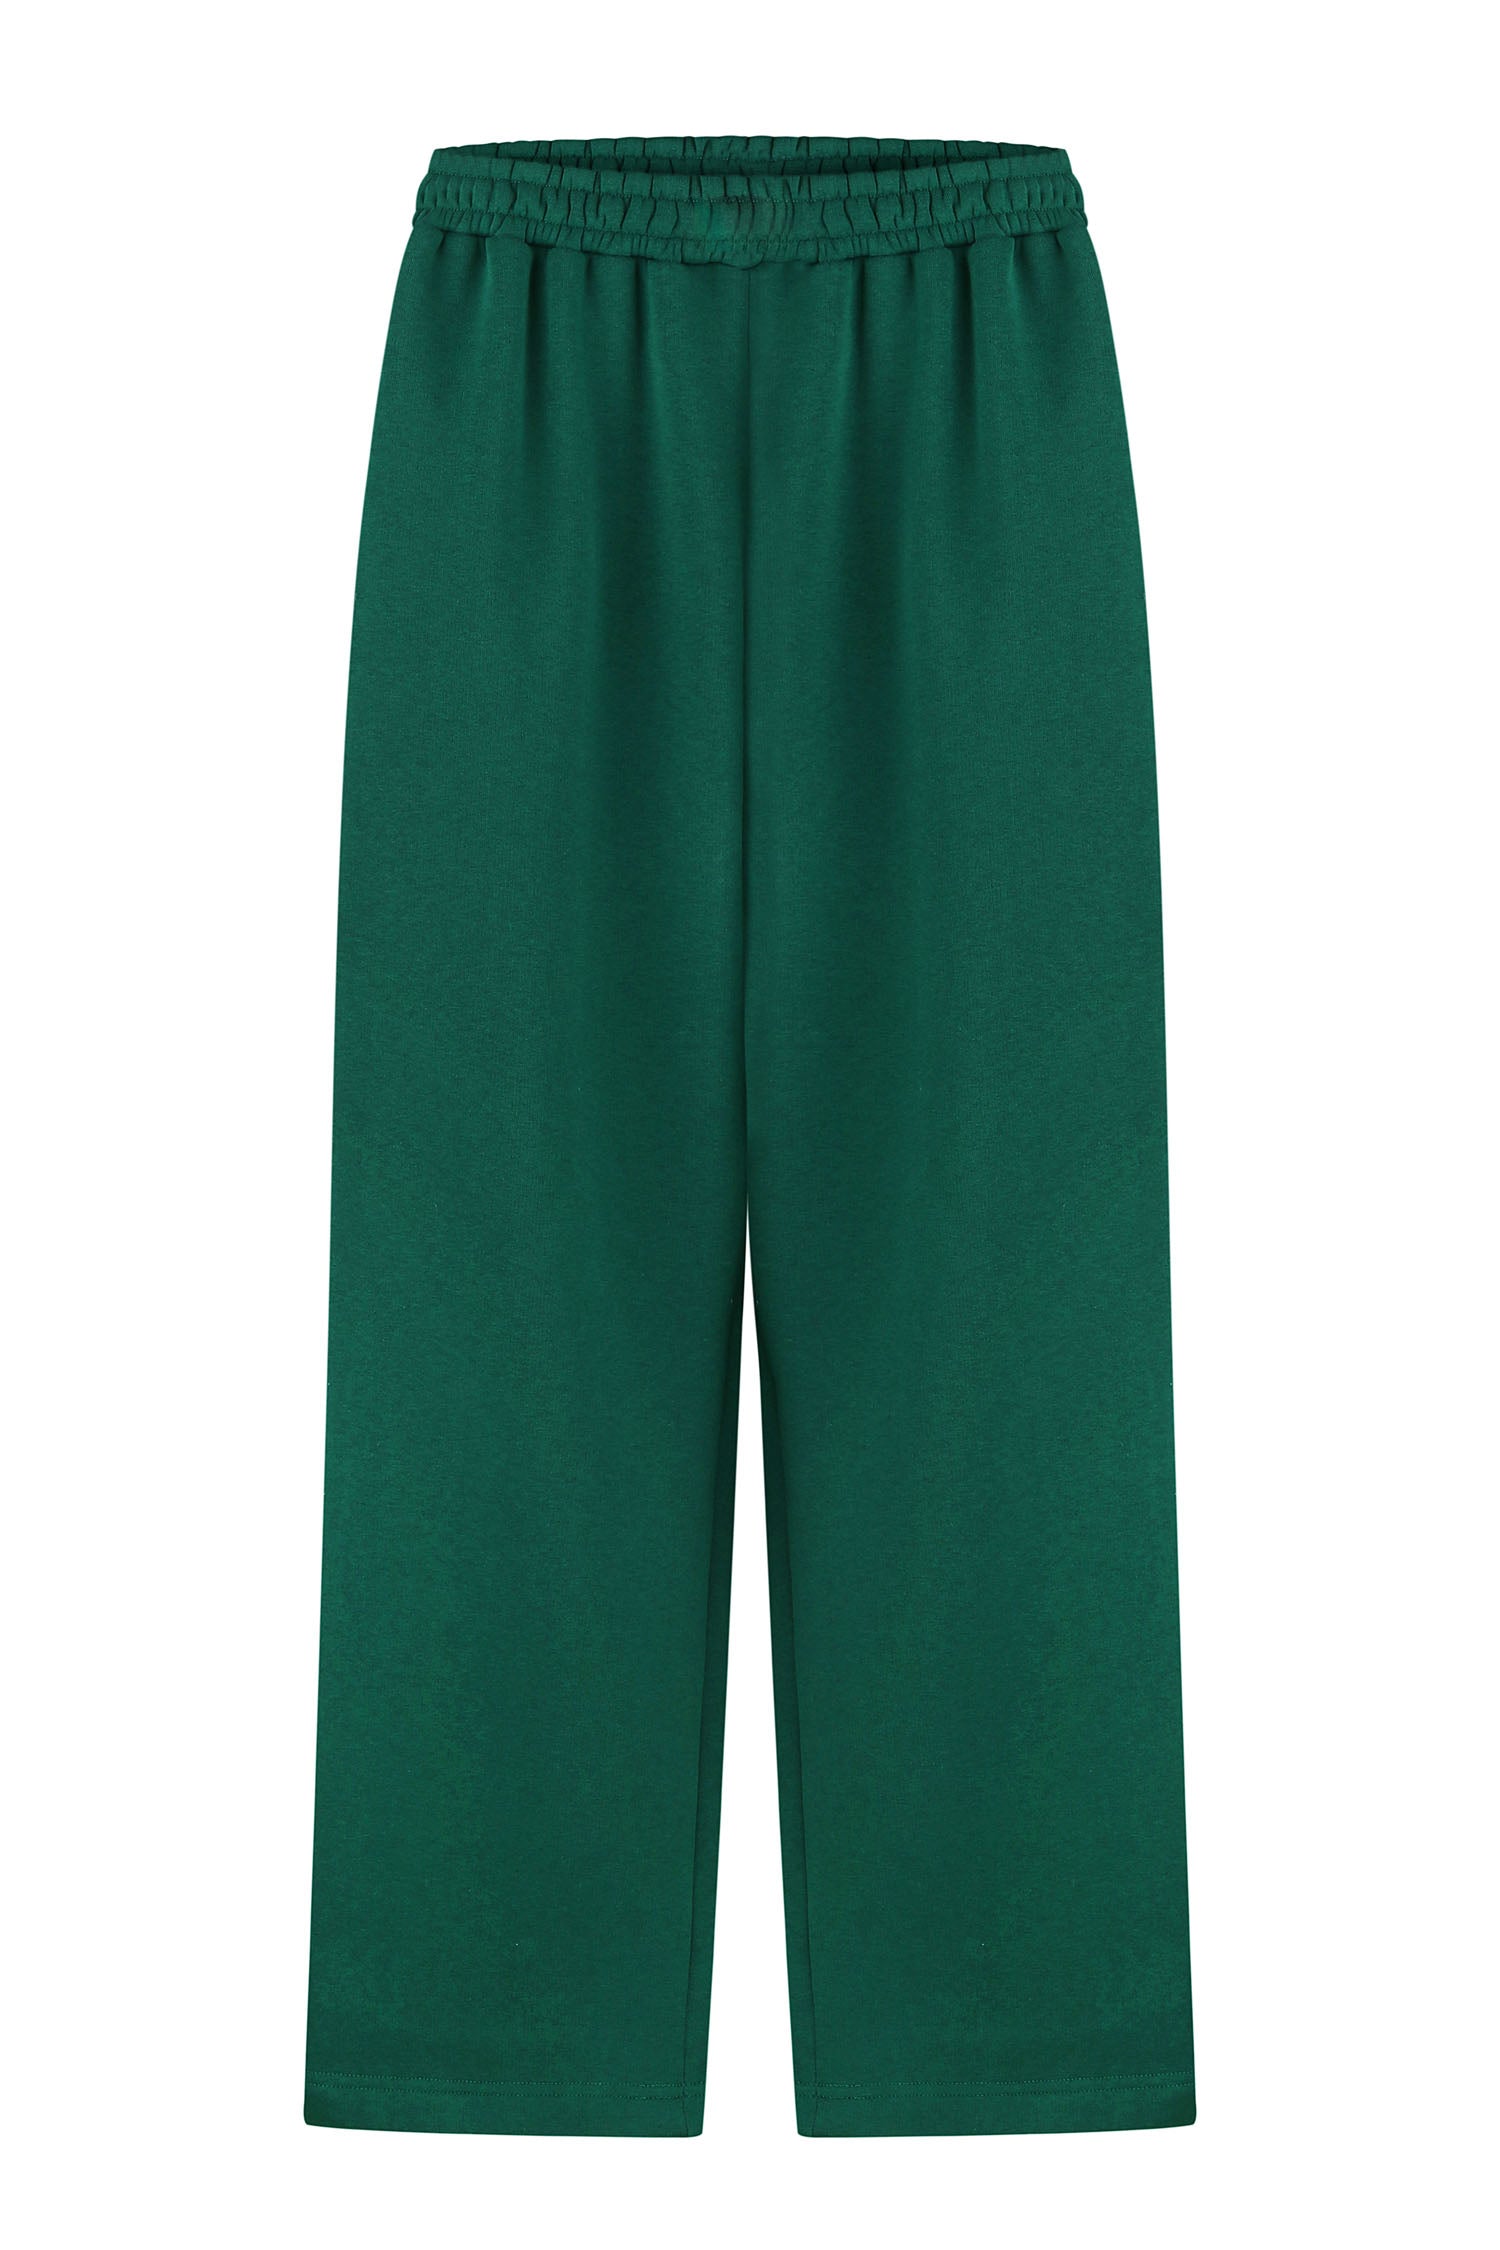 Straight Fit Pants in Shadow Green